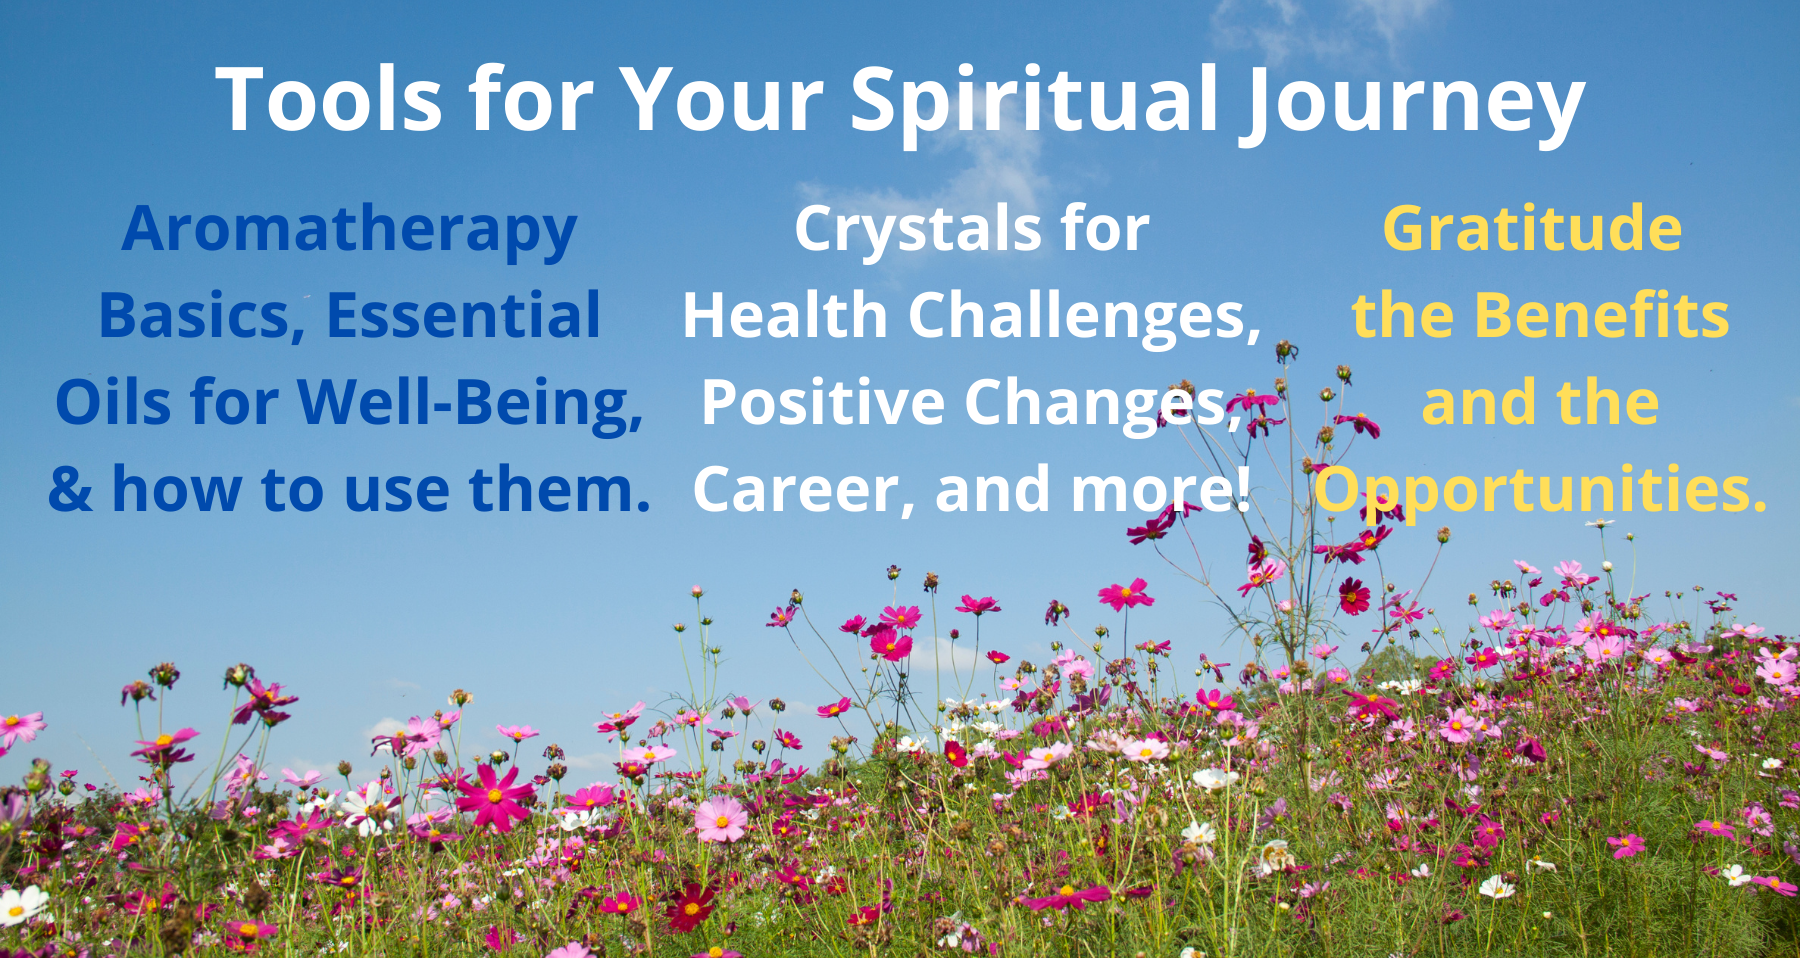 Tools for Your Spiritual Journey